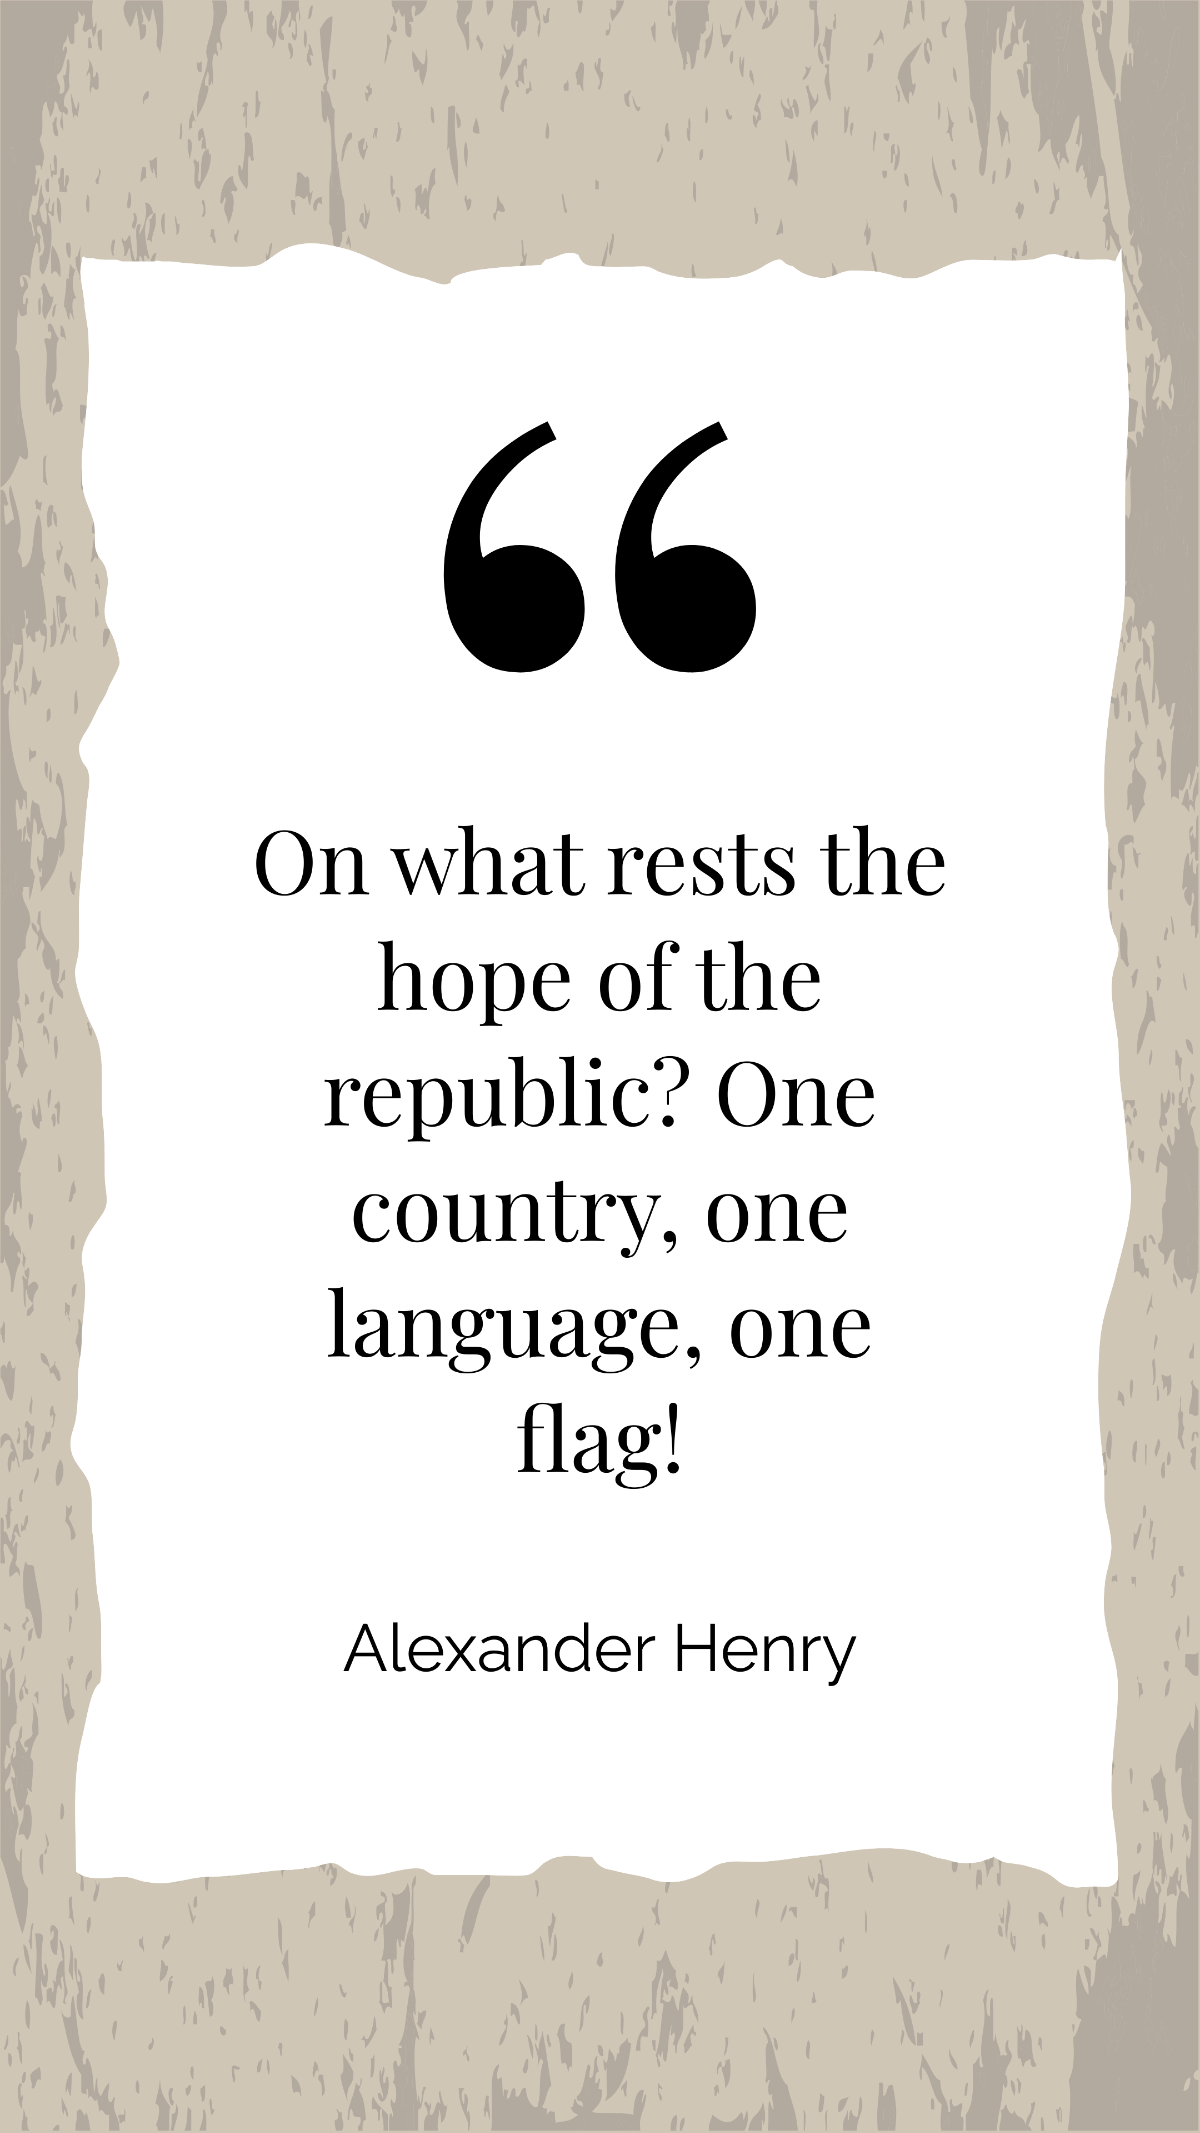 Alexander Henry - On what rests the hope of the republic? One country, one language, one flag! Template